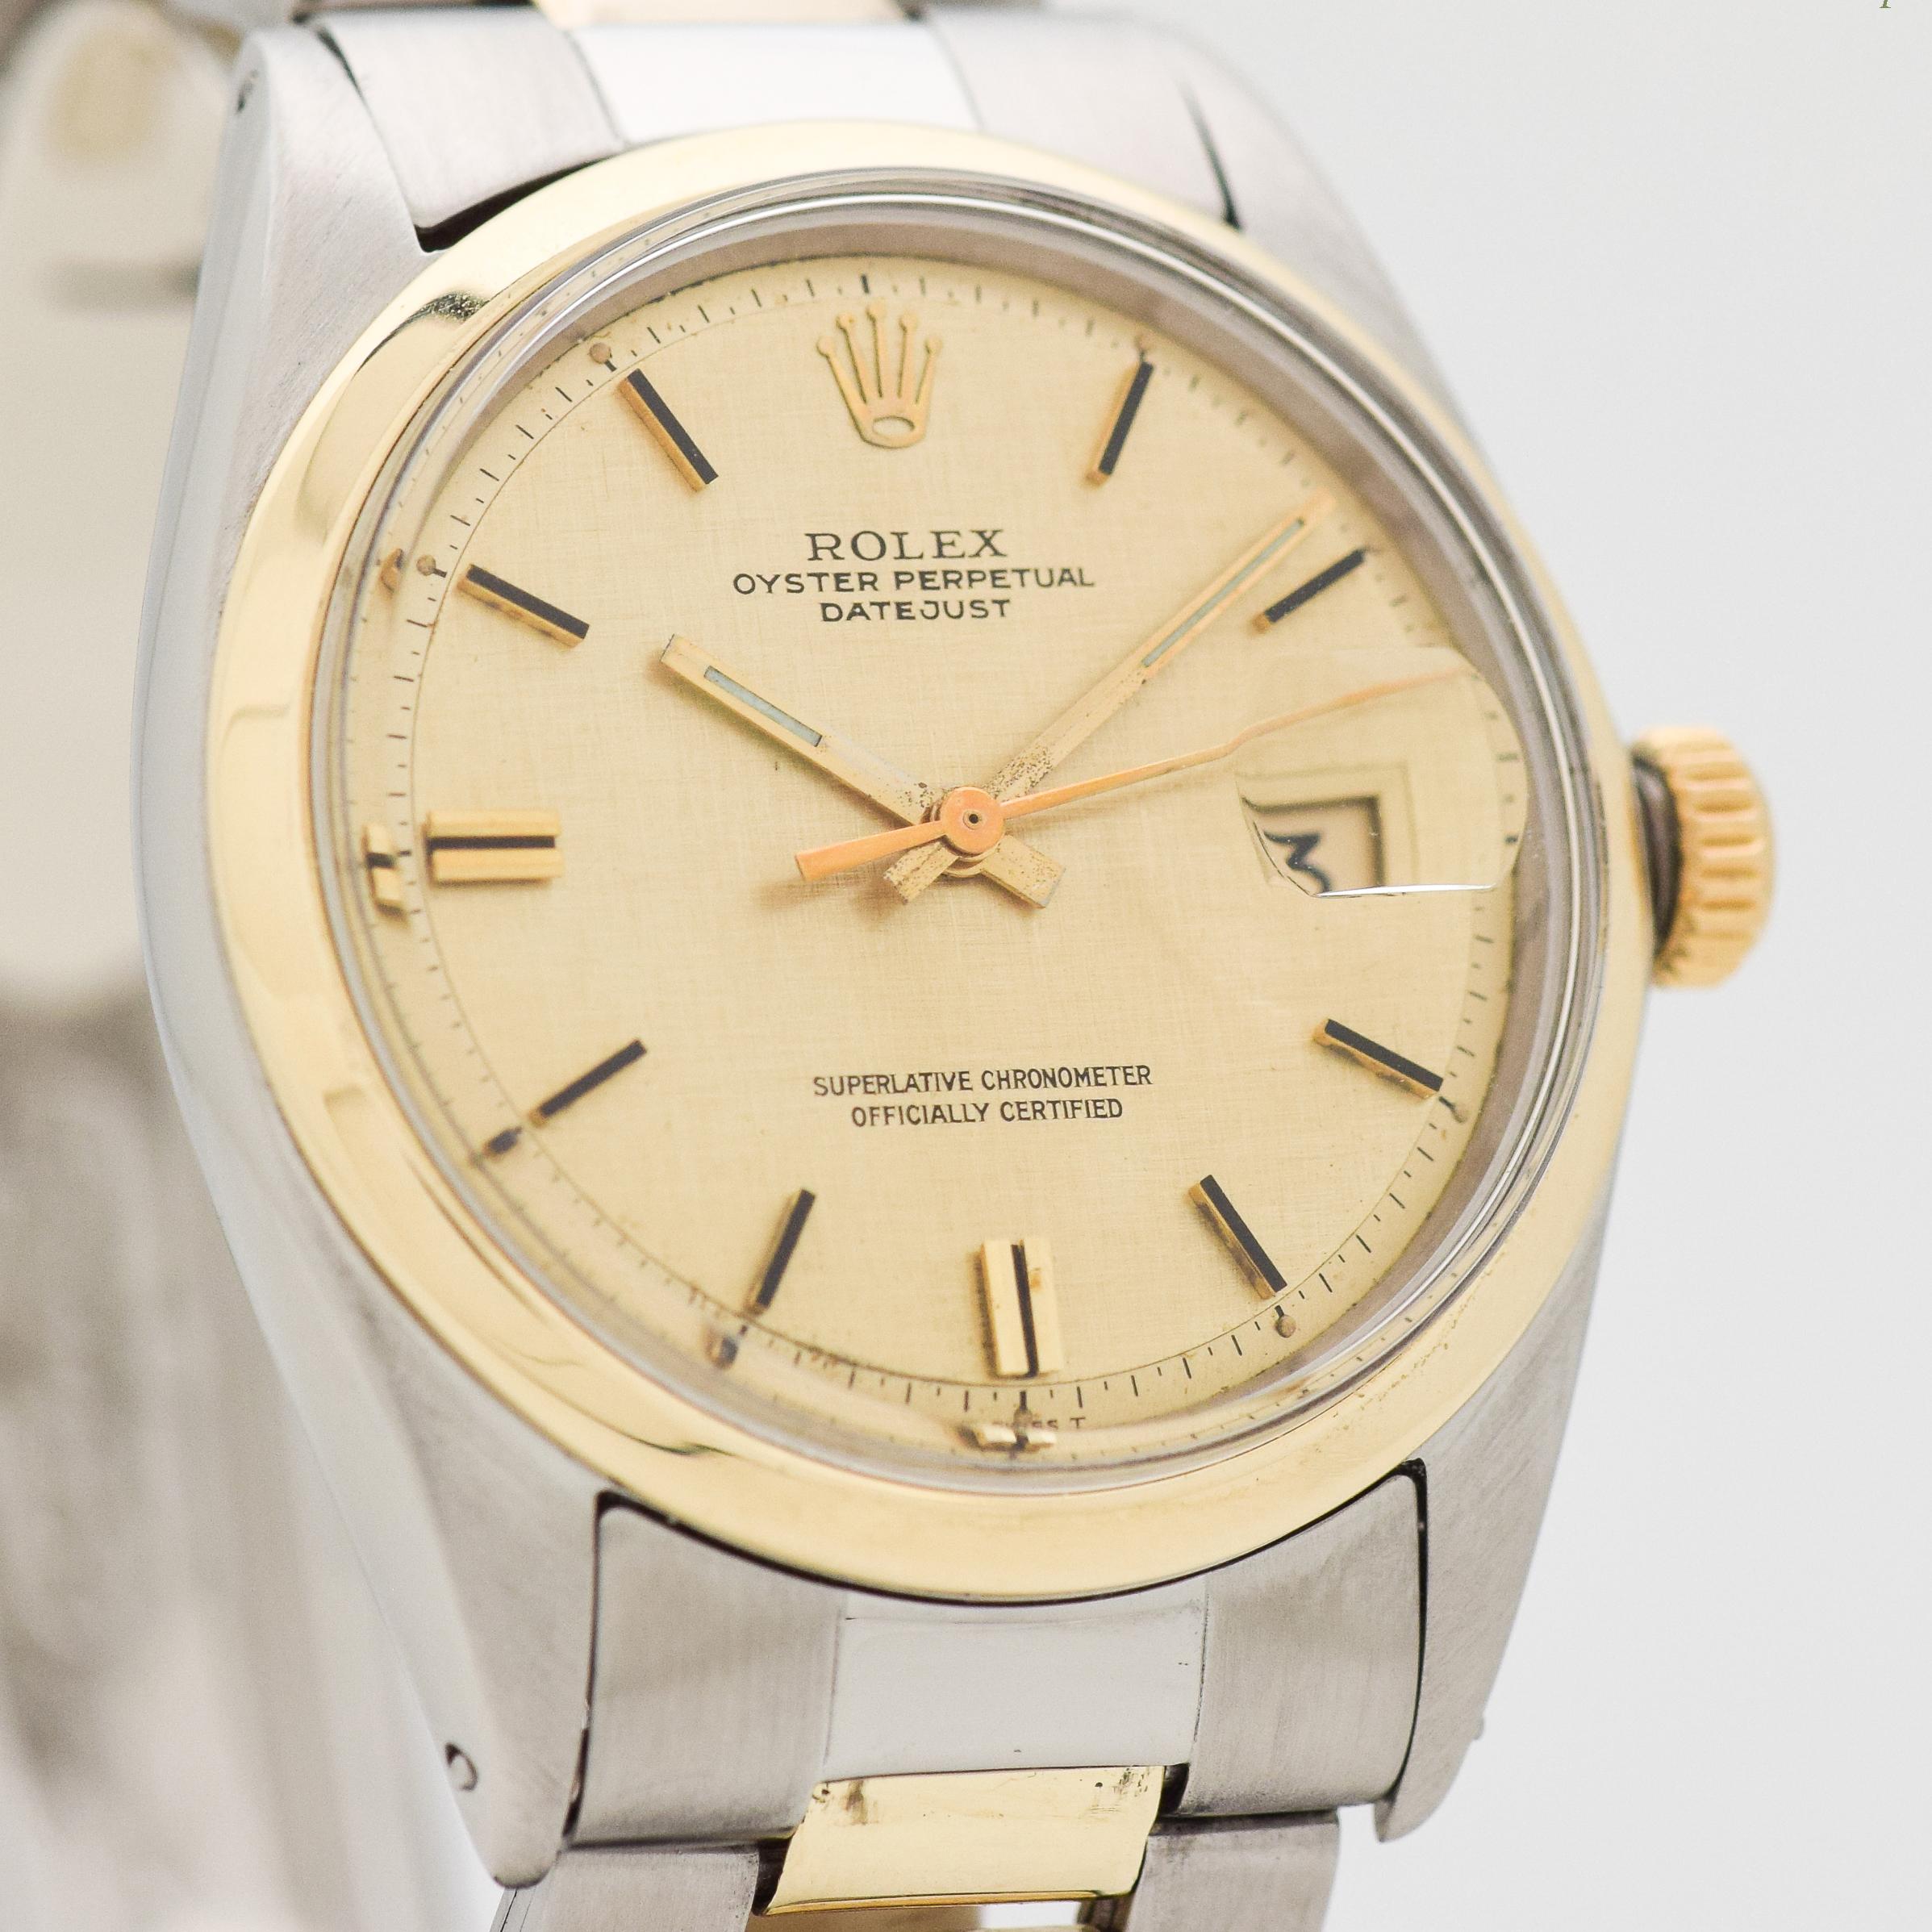 1968 Vintage Rolex Datejust Rare Ref. 1600 Two Tone 14k Yellow Gold and Stainless Steel watch with Original Rare Champagne/Gold Dial with Applied Gold Color Stick/Bar/Baton Markers with Black Inlay with Original Rolex Two Tone 14k Yellow Gold and